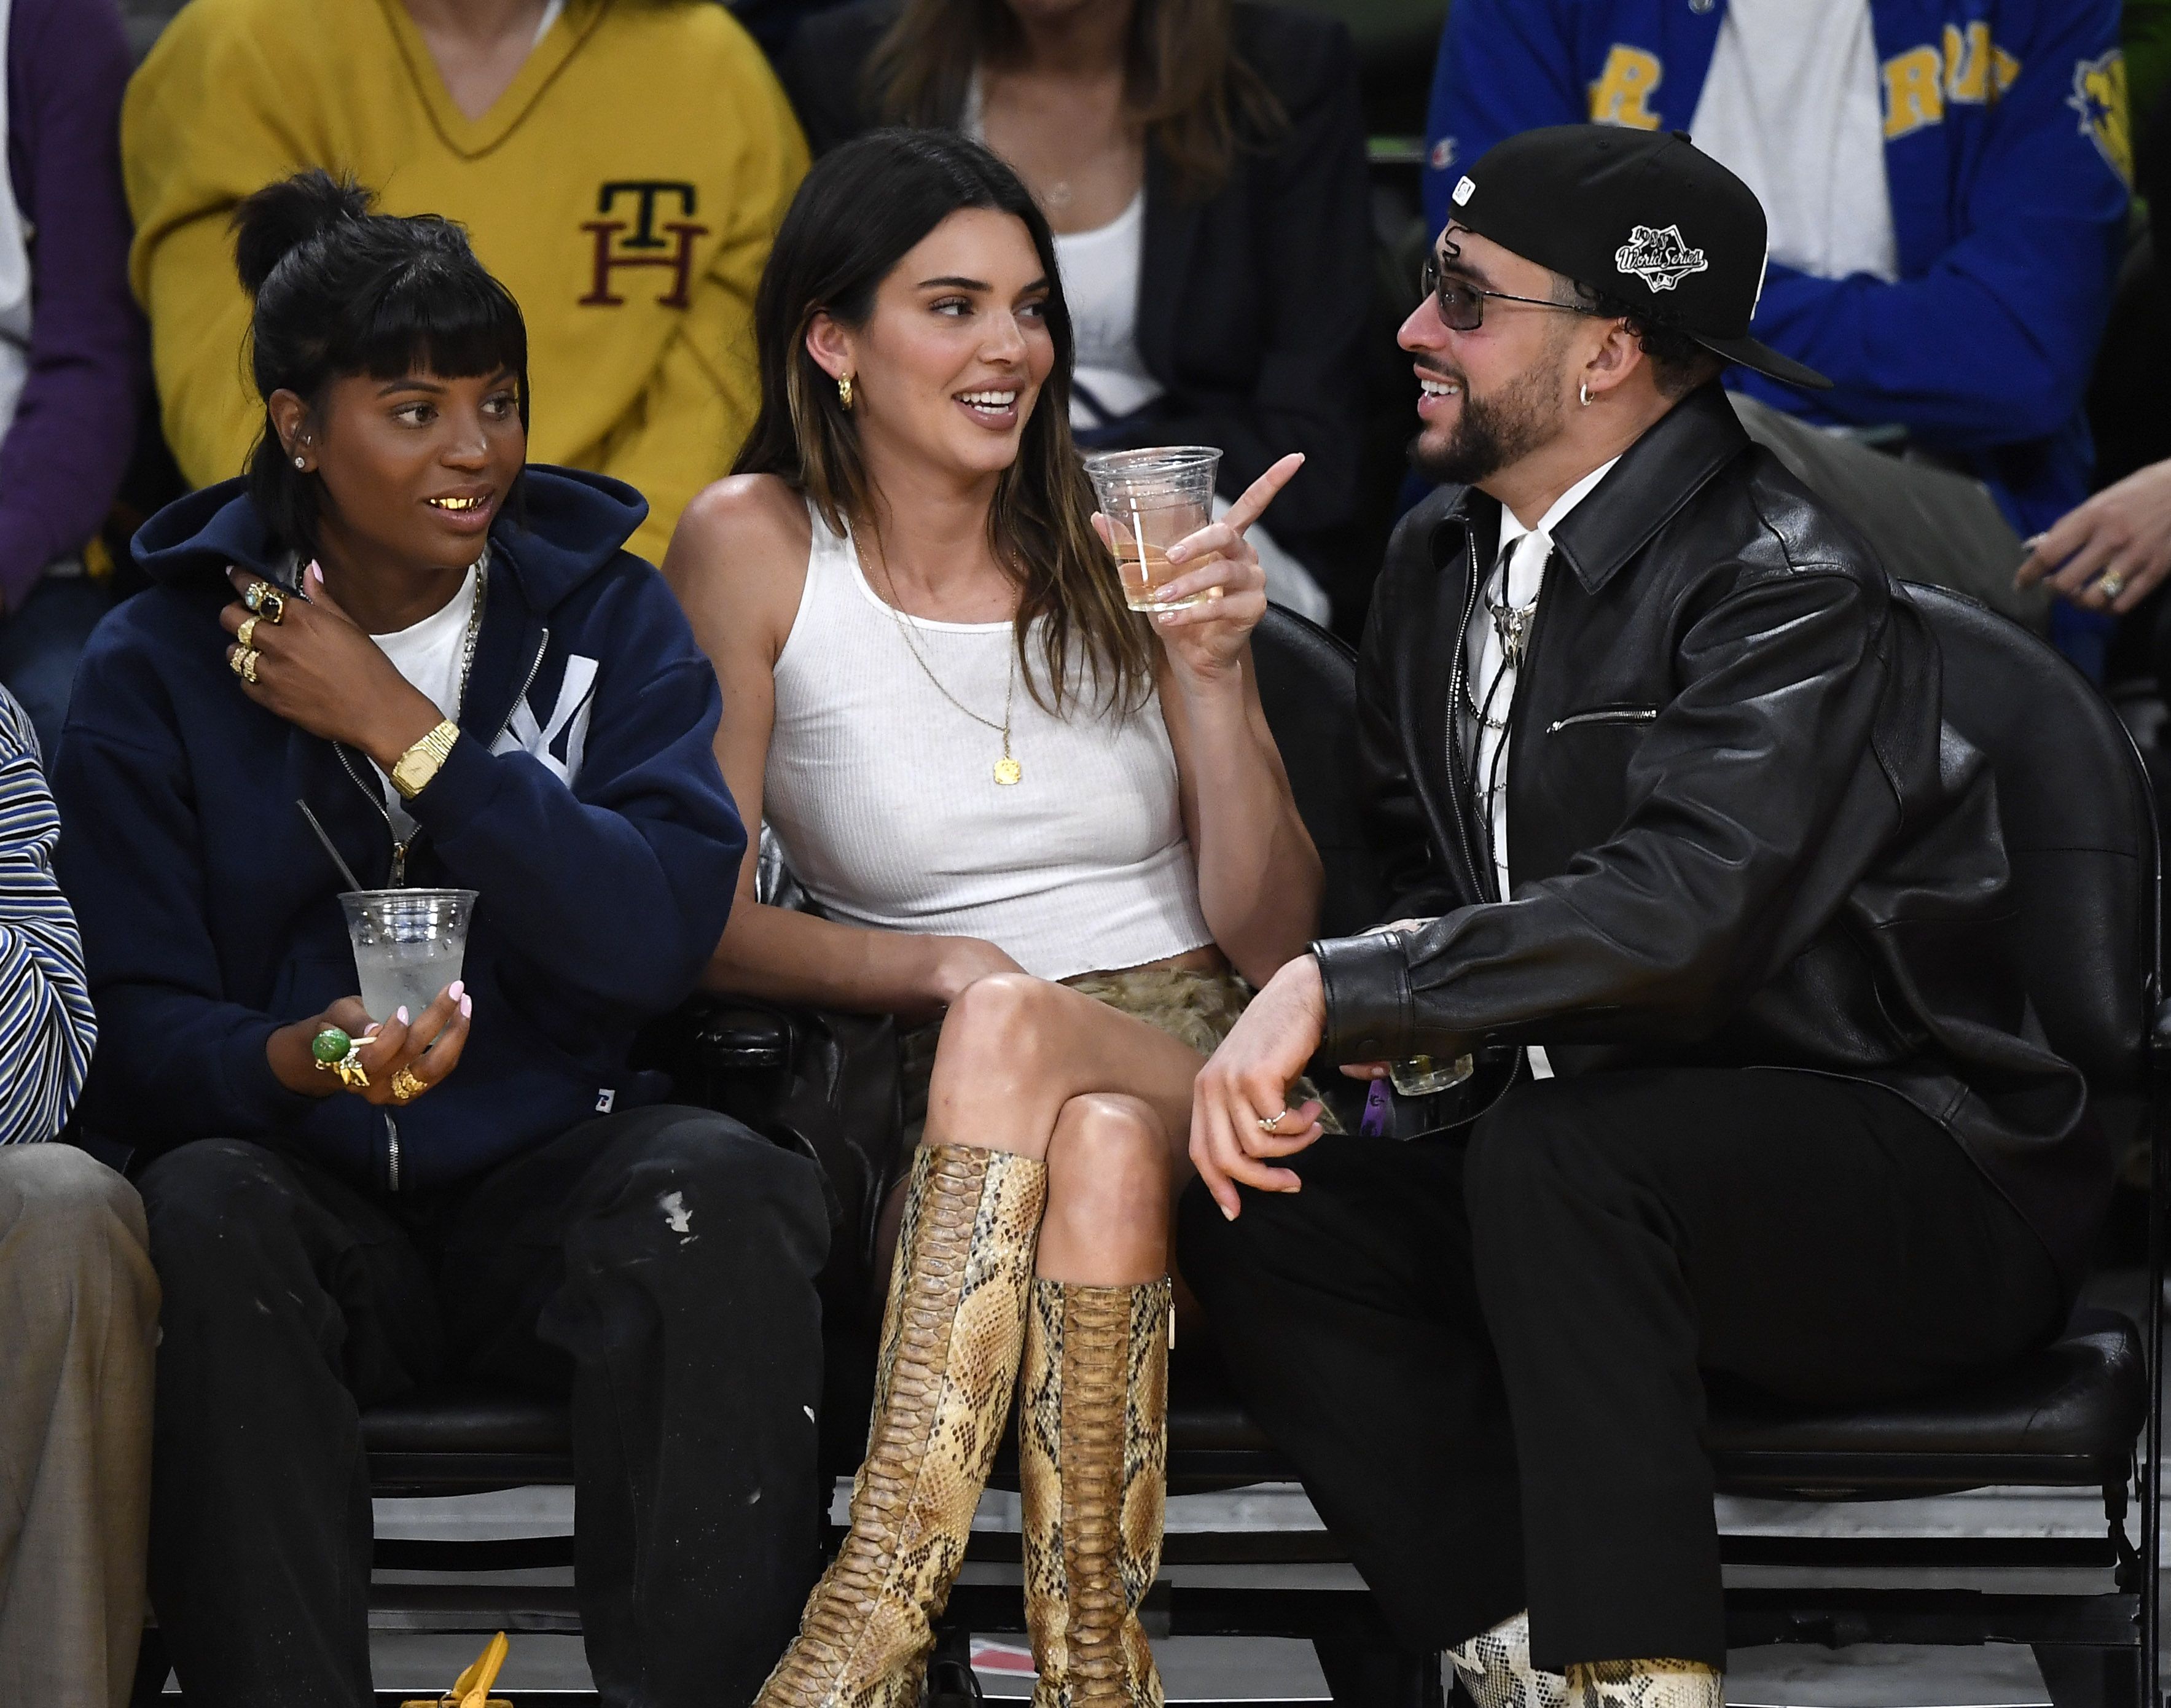 Kendall Jenner & Bad Bunny Sit Courtside On Date At L.A. Lakers